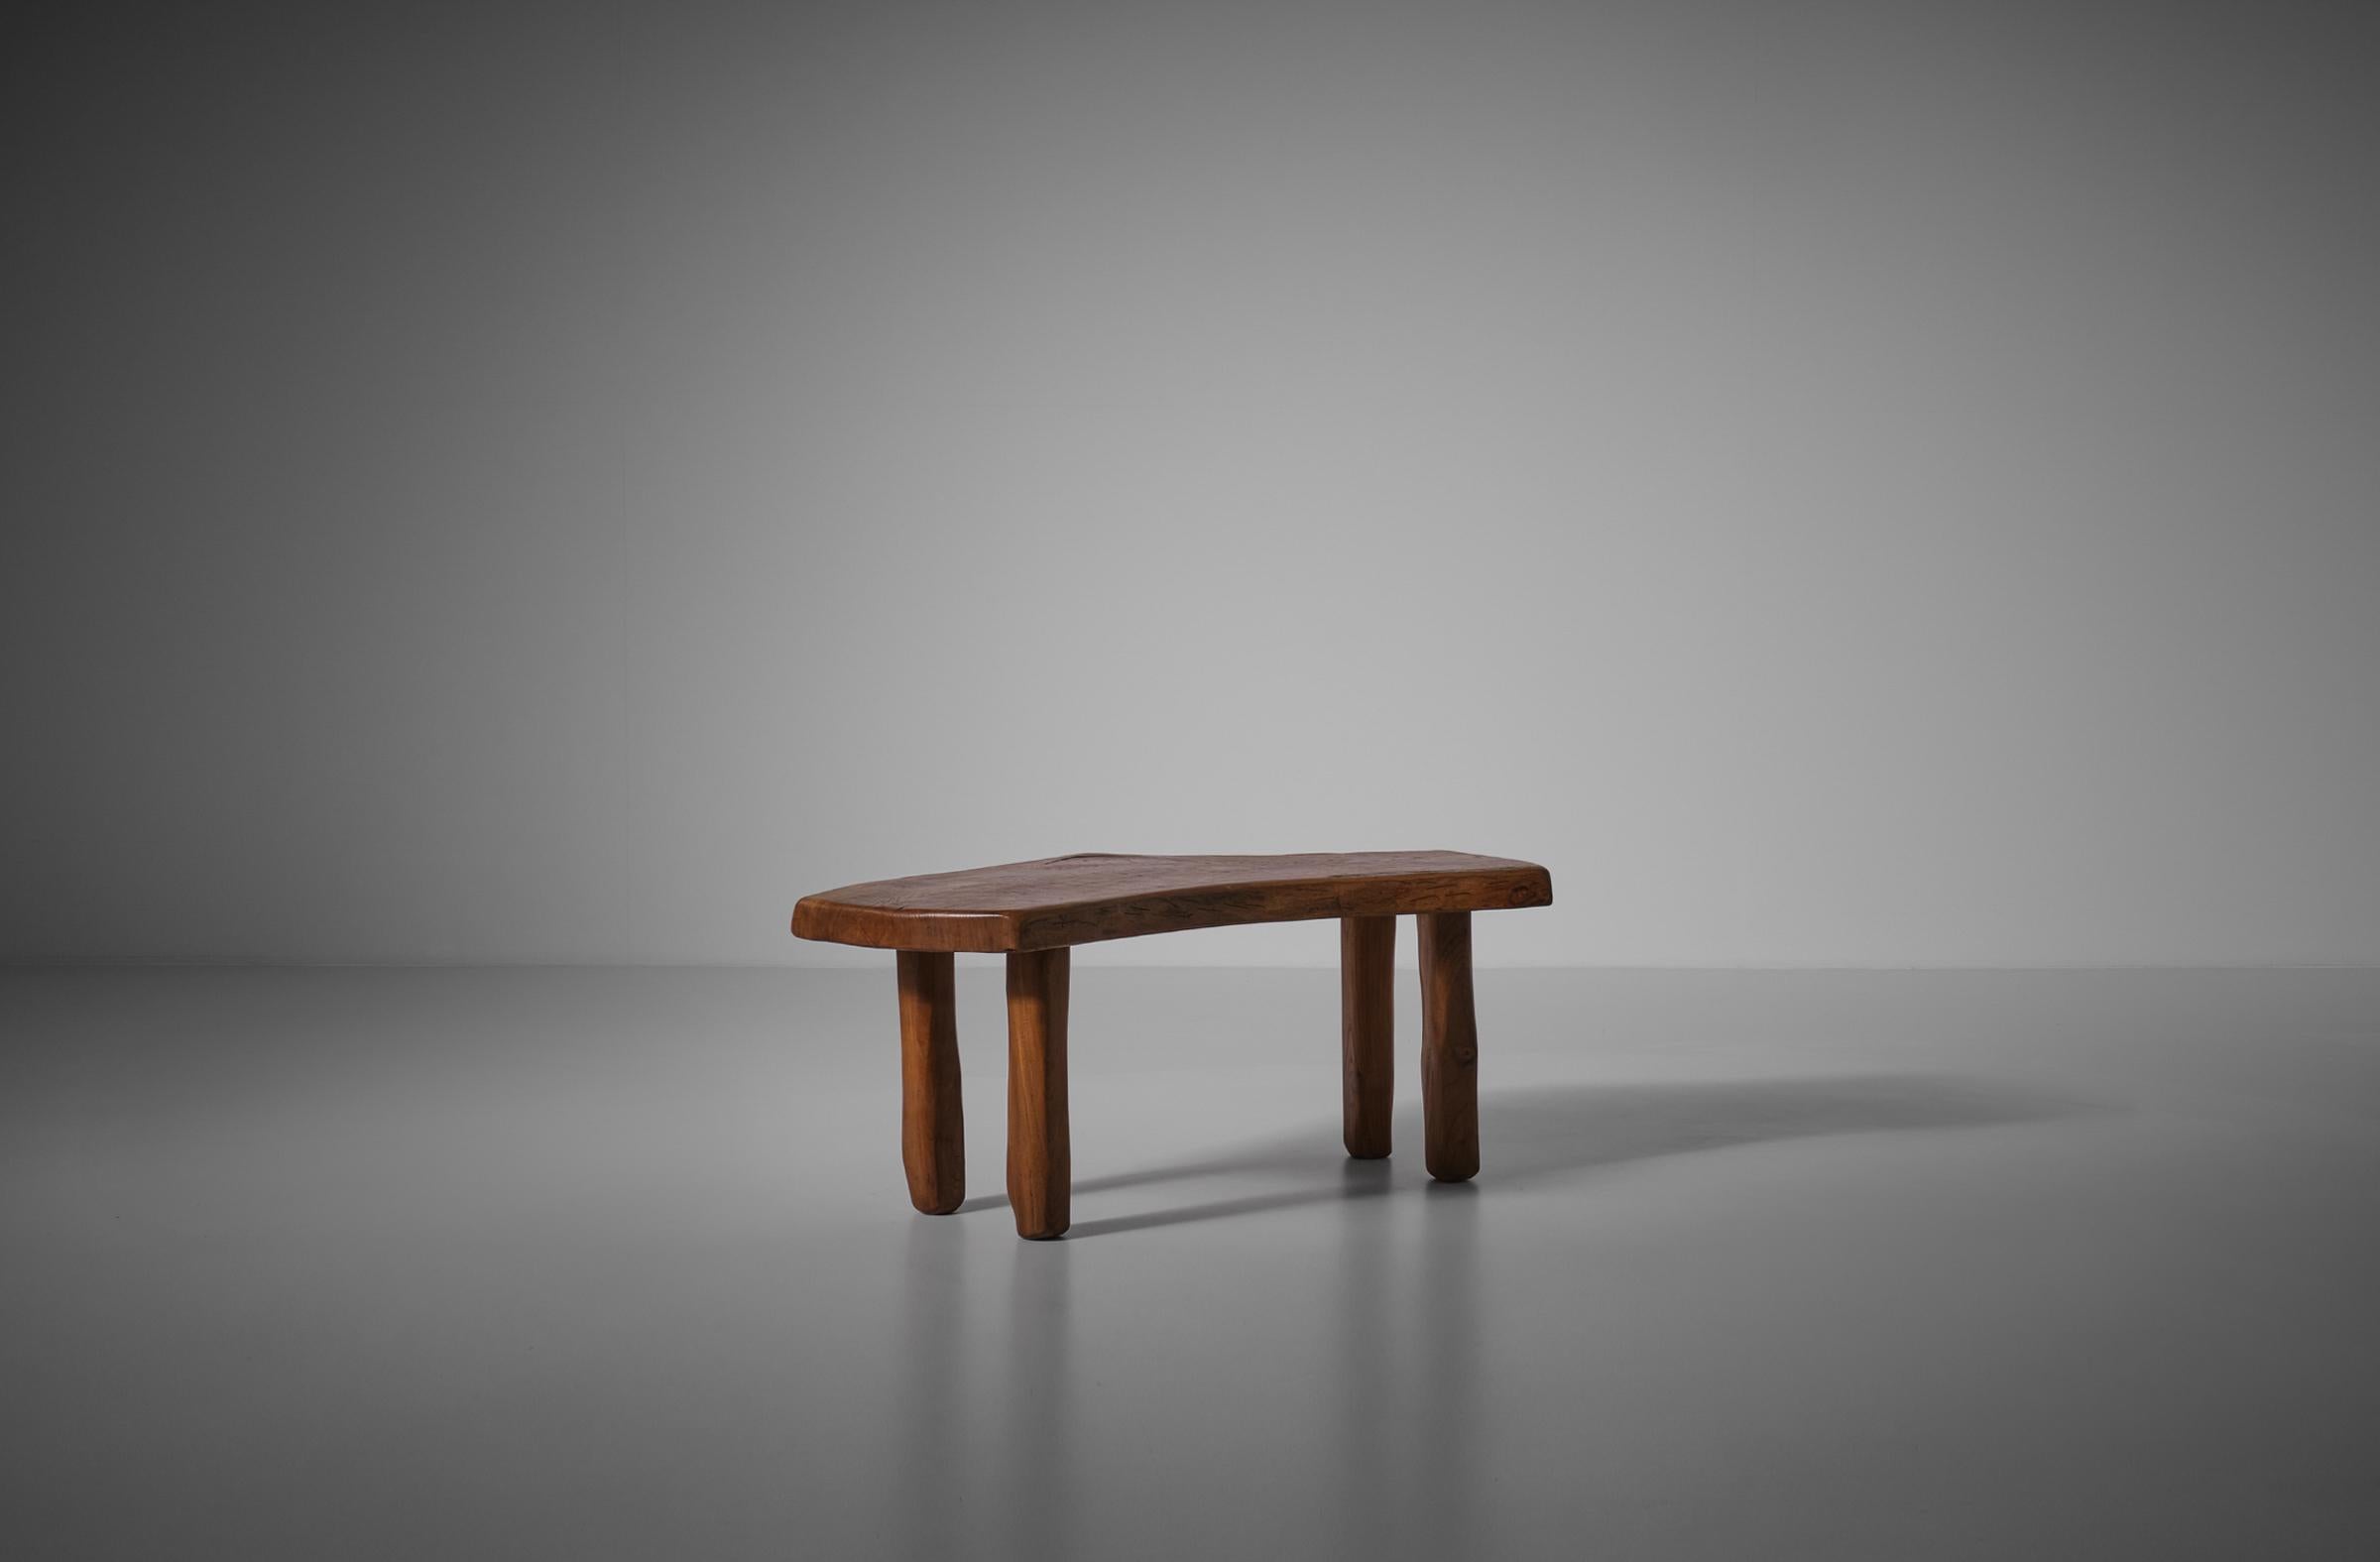 Sculptural Carved wooden table by Charles Flandre, France 1960. Charles Flandre was a woodworker who created sculptural objects and furniture. He is known for his organically shaped and carved objects out of solid wood, the natural shape stands